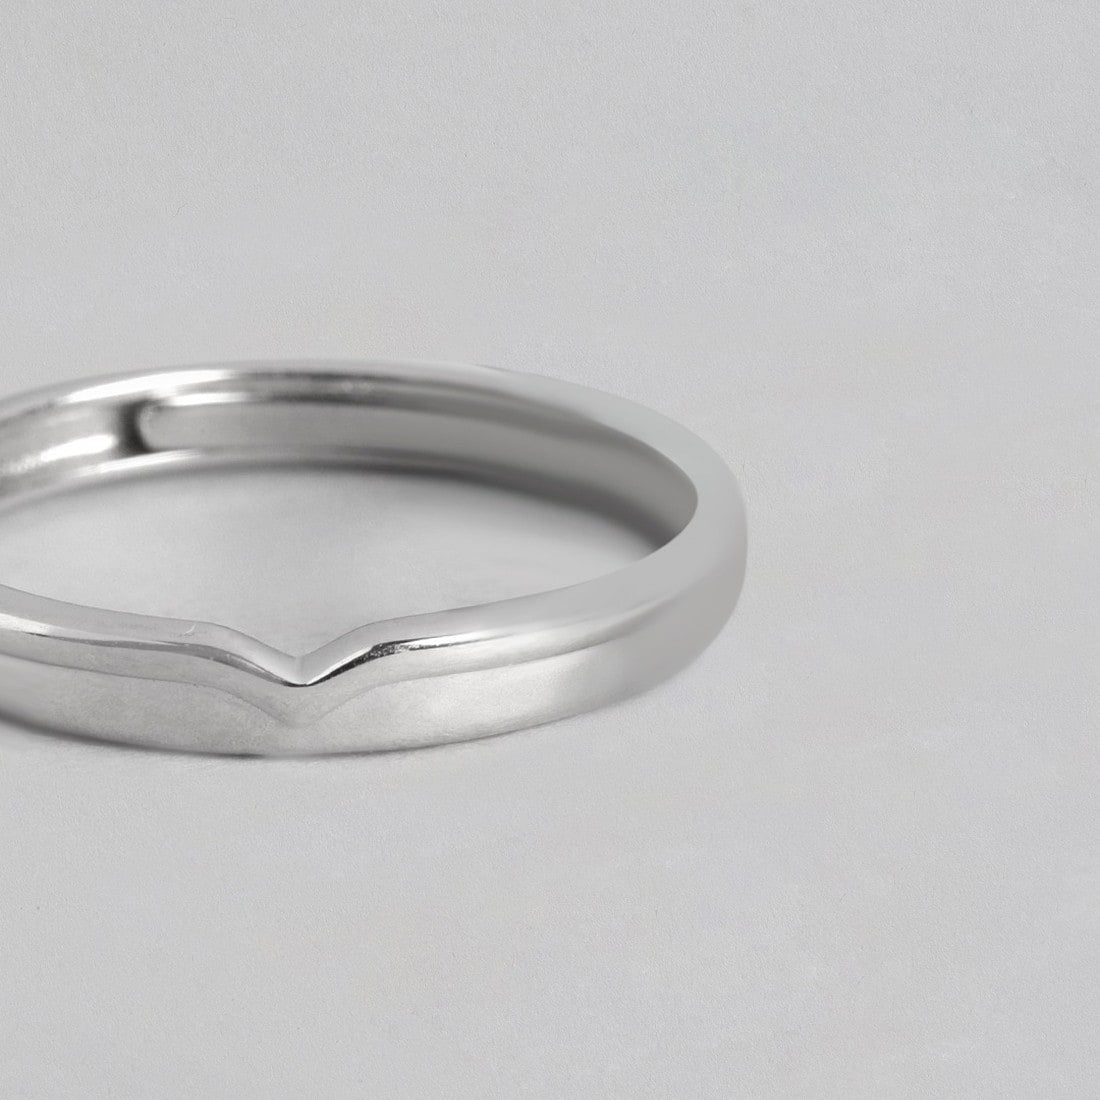 Minimalistic Rhodium Plated 925 Sterling Silver Ring for Him (Adjustable)